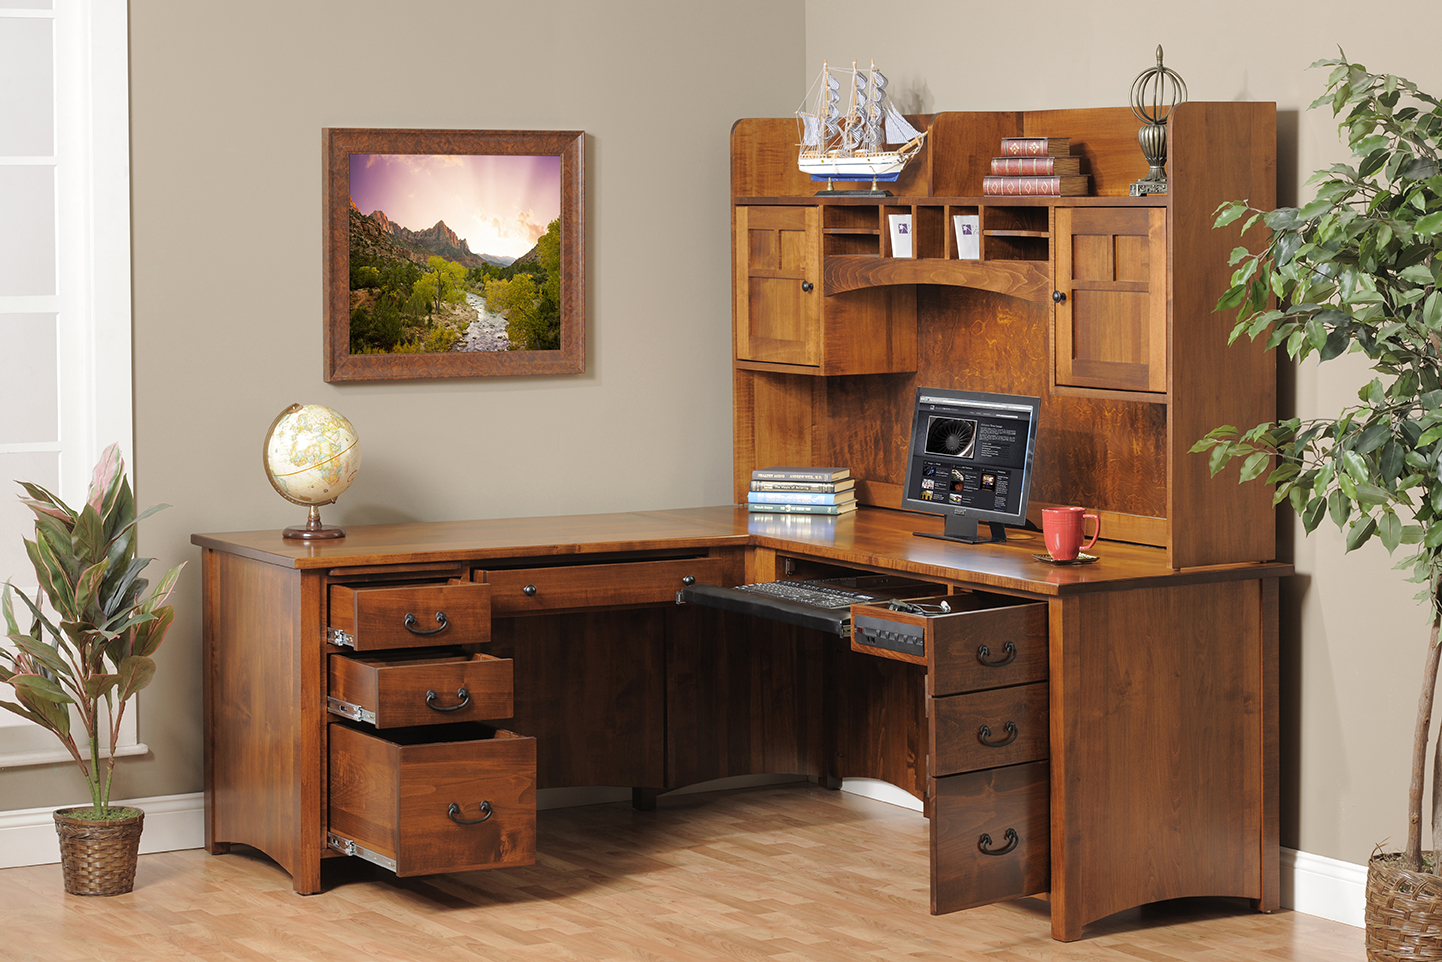 Office Impressive Office Desk Hutch Details Simple On Throughout Computer Table Designs For 0 Impressive Office Desk Hutch Details